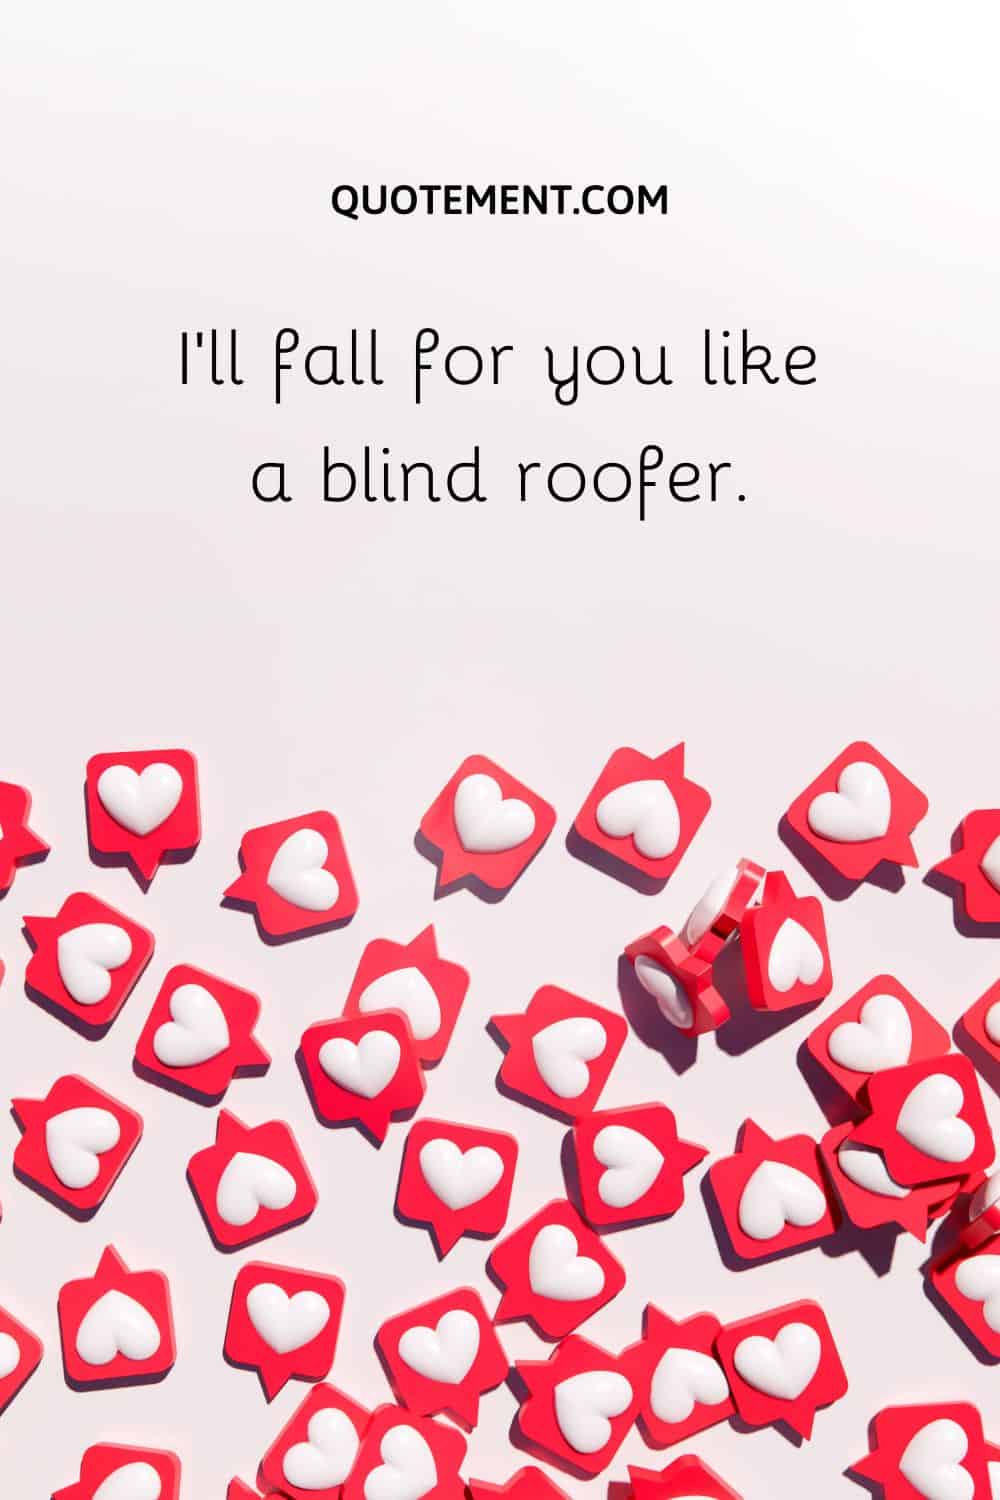 I’ll fall for you like a blind roofer